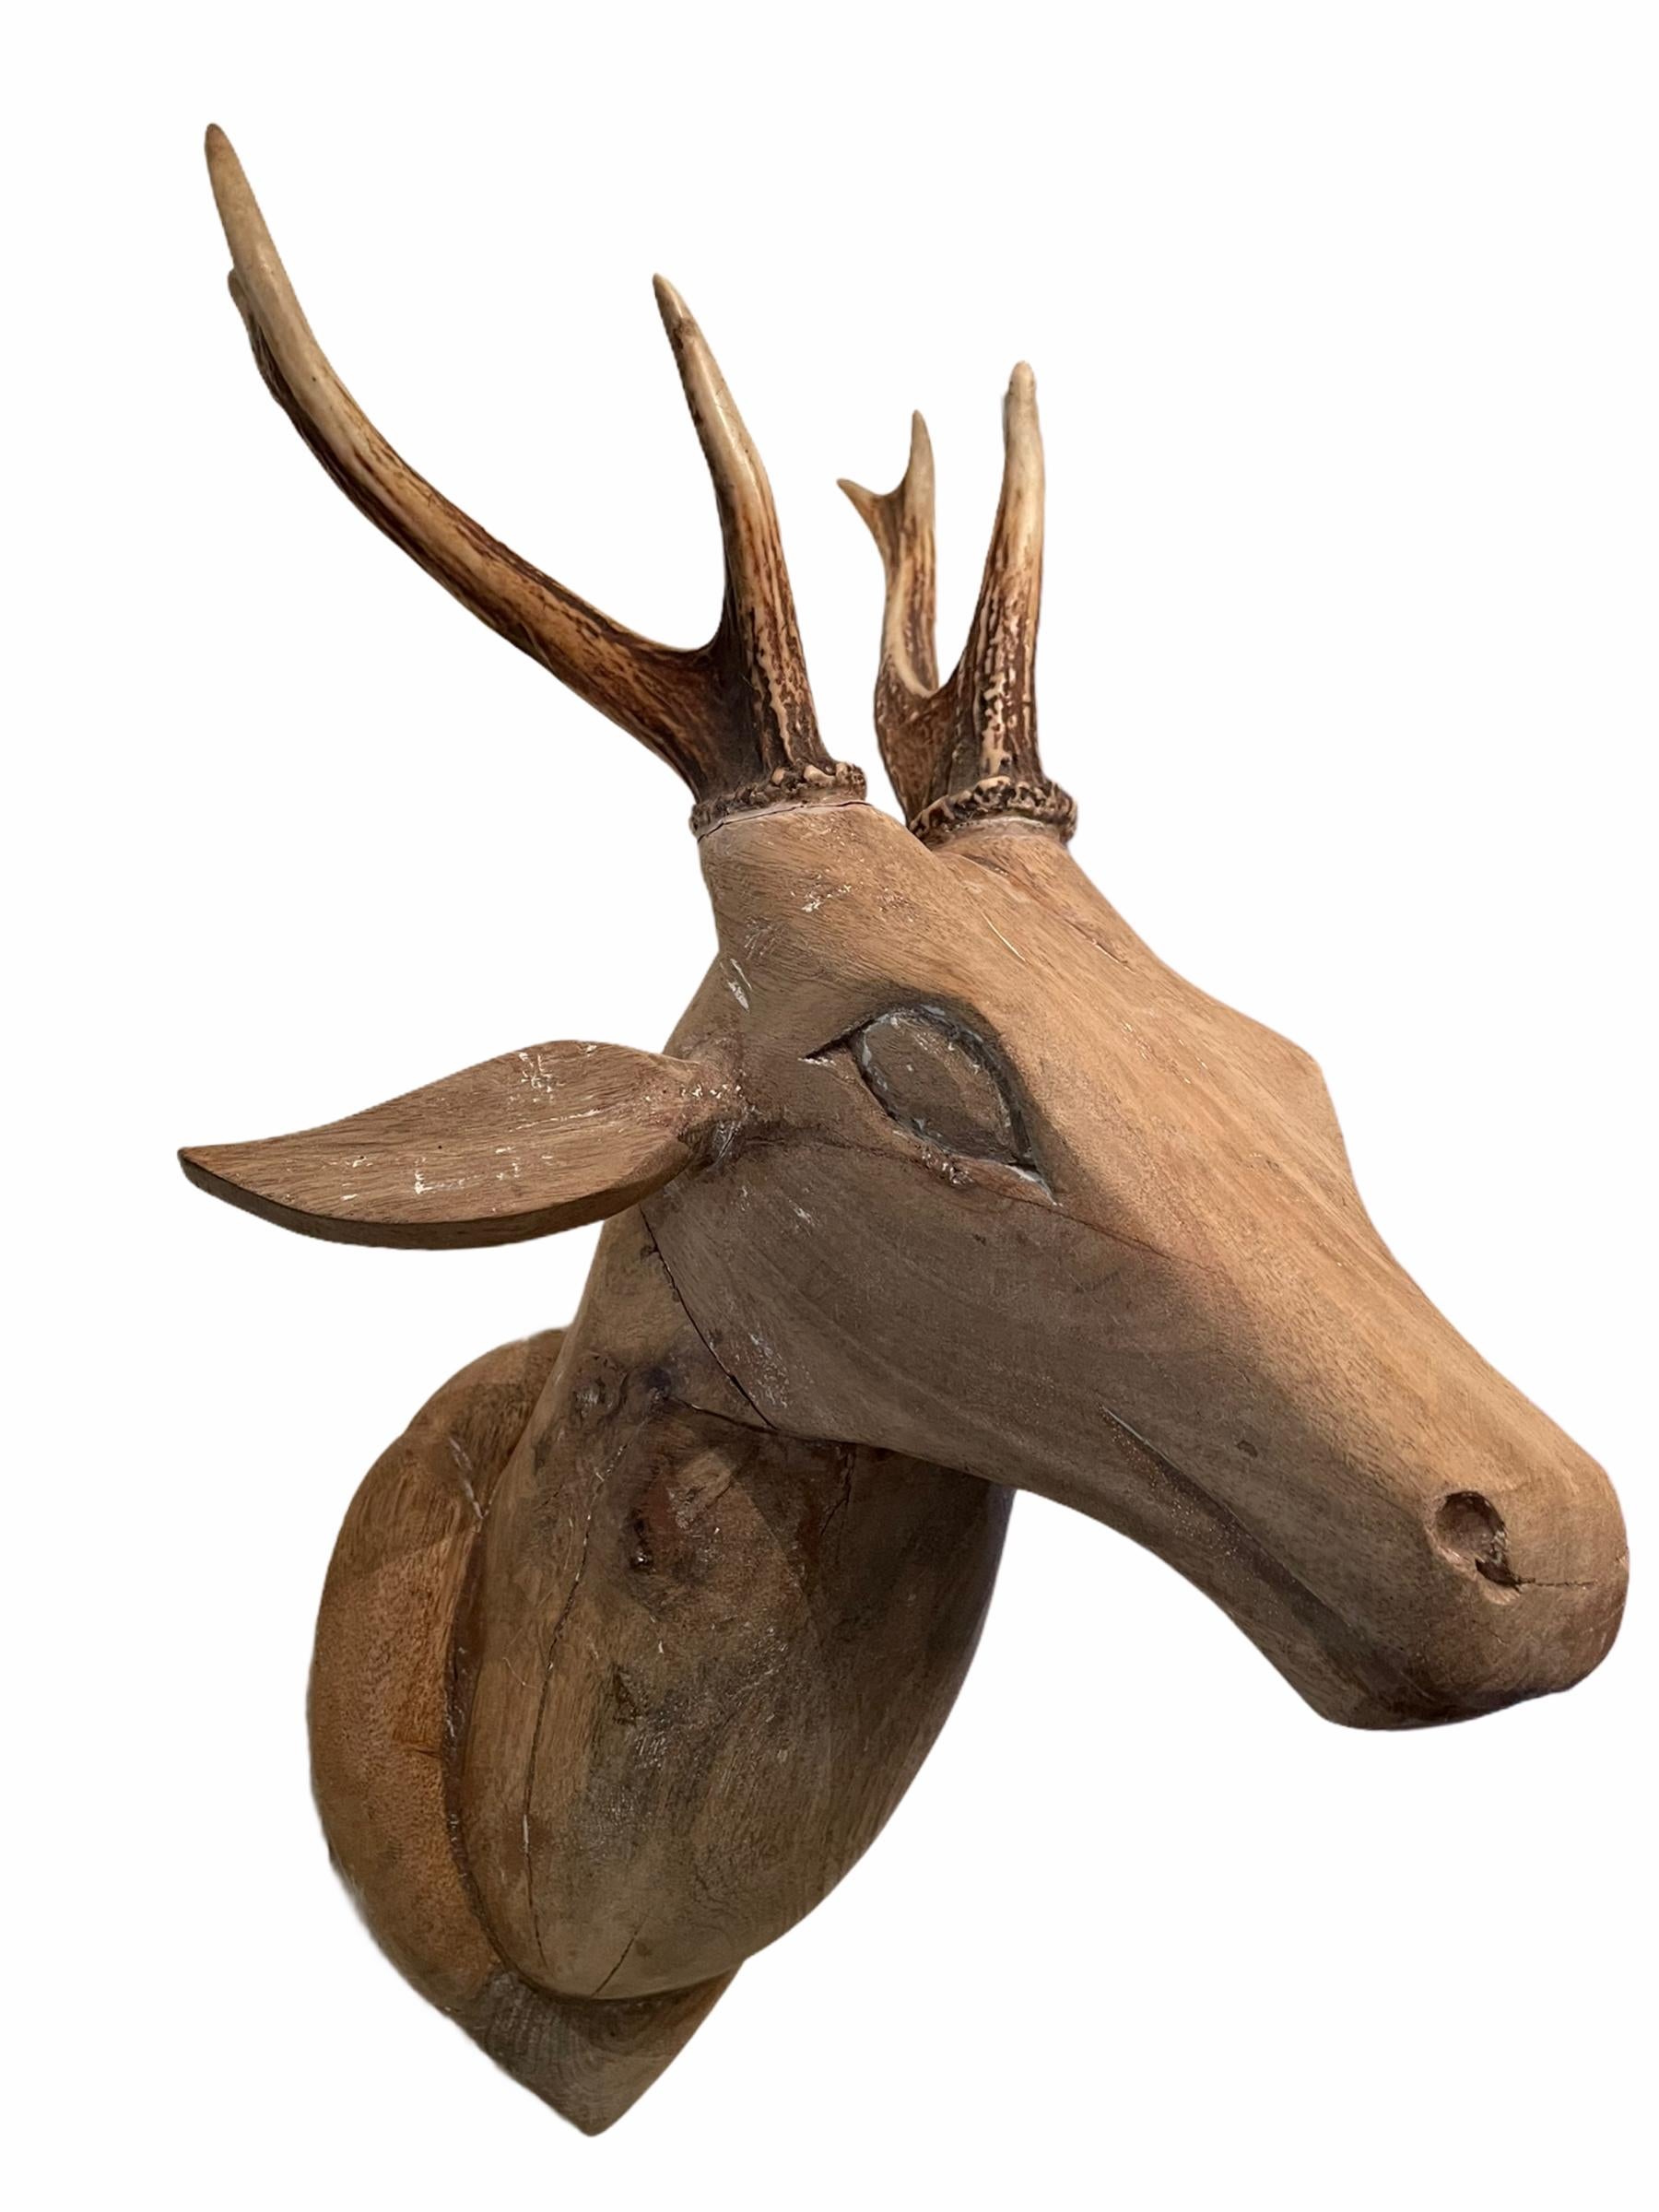 Hand-Carved Large Folk Art Carved Wood Deer Head with Real Antlers, 19th Century